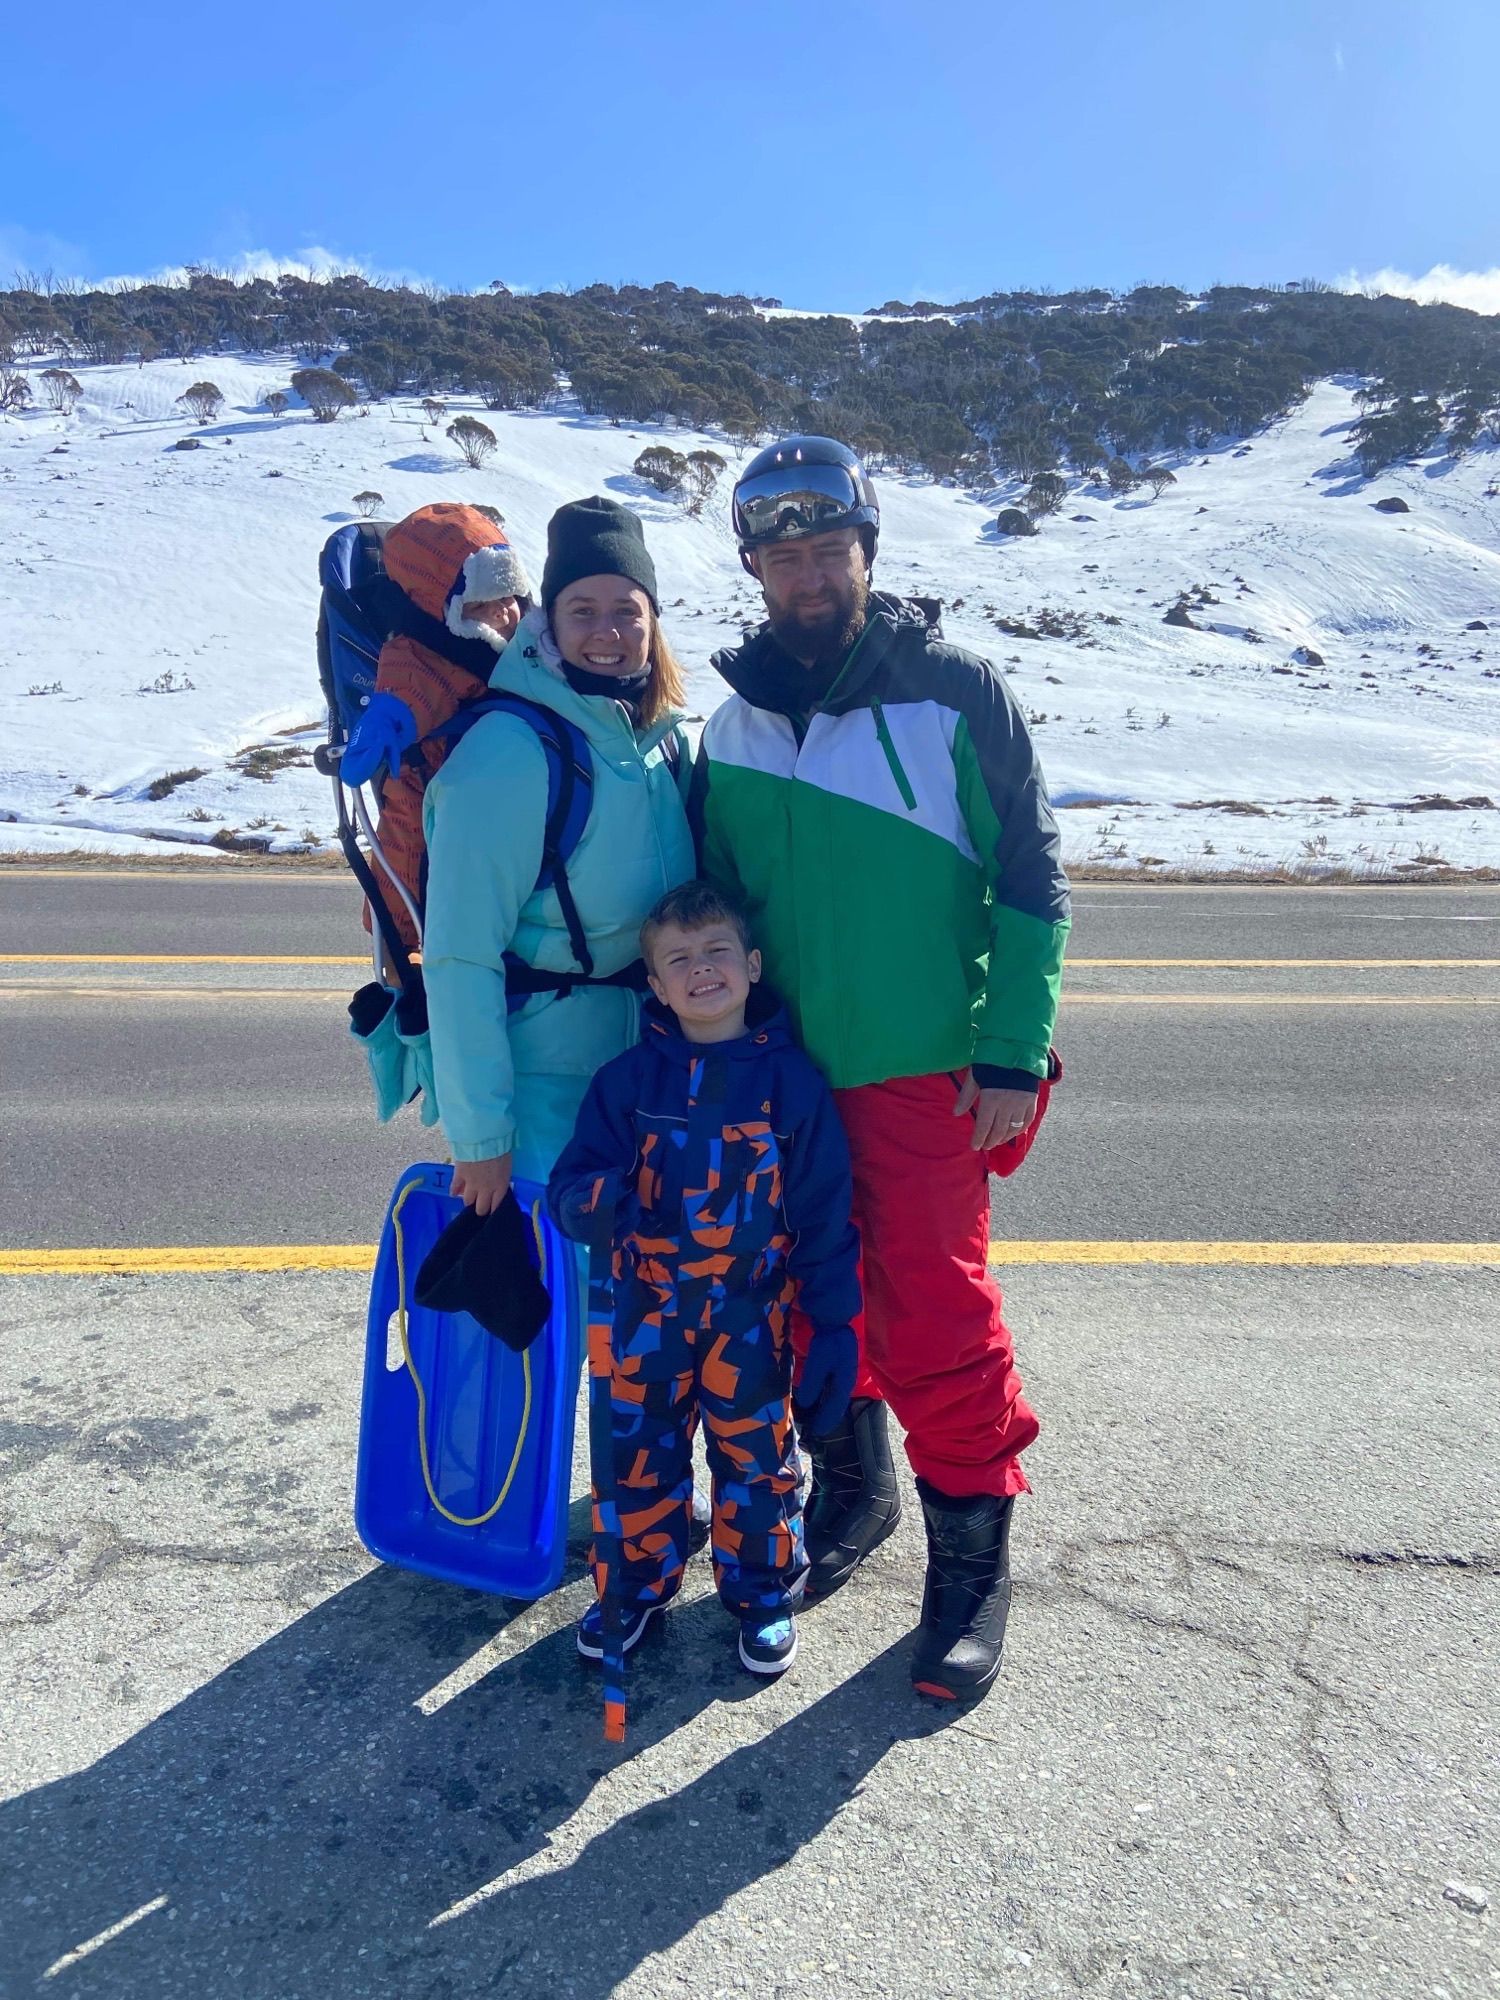 Jessica and her family wearing ski gear at the snow